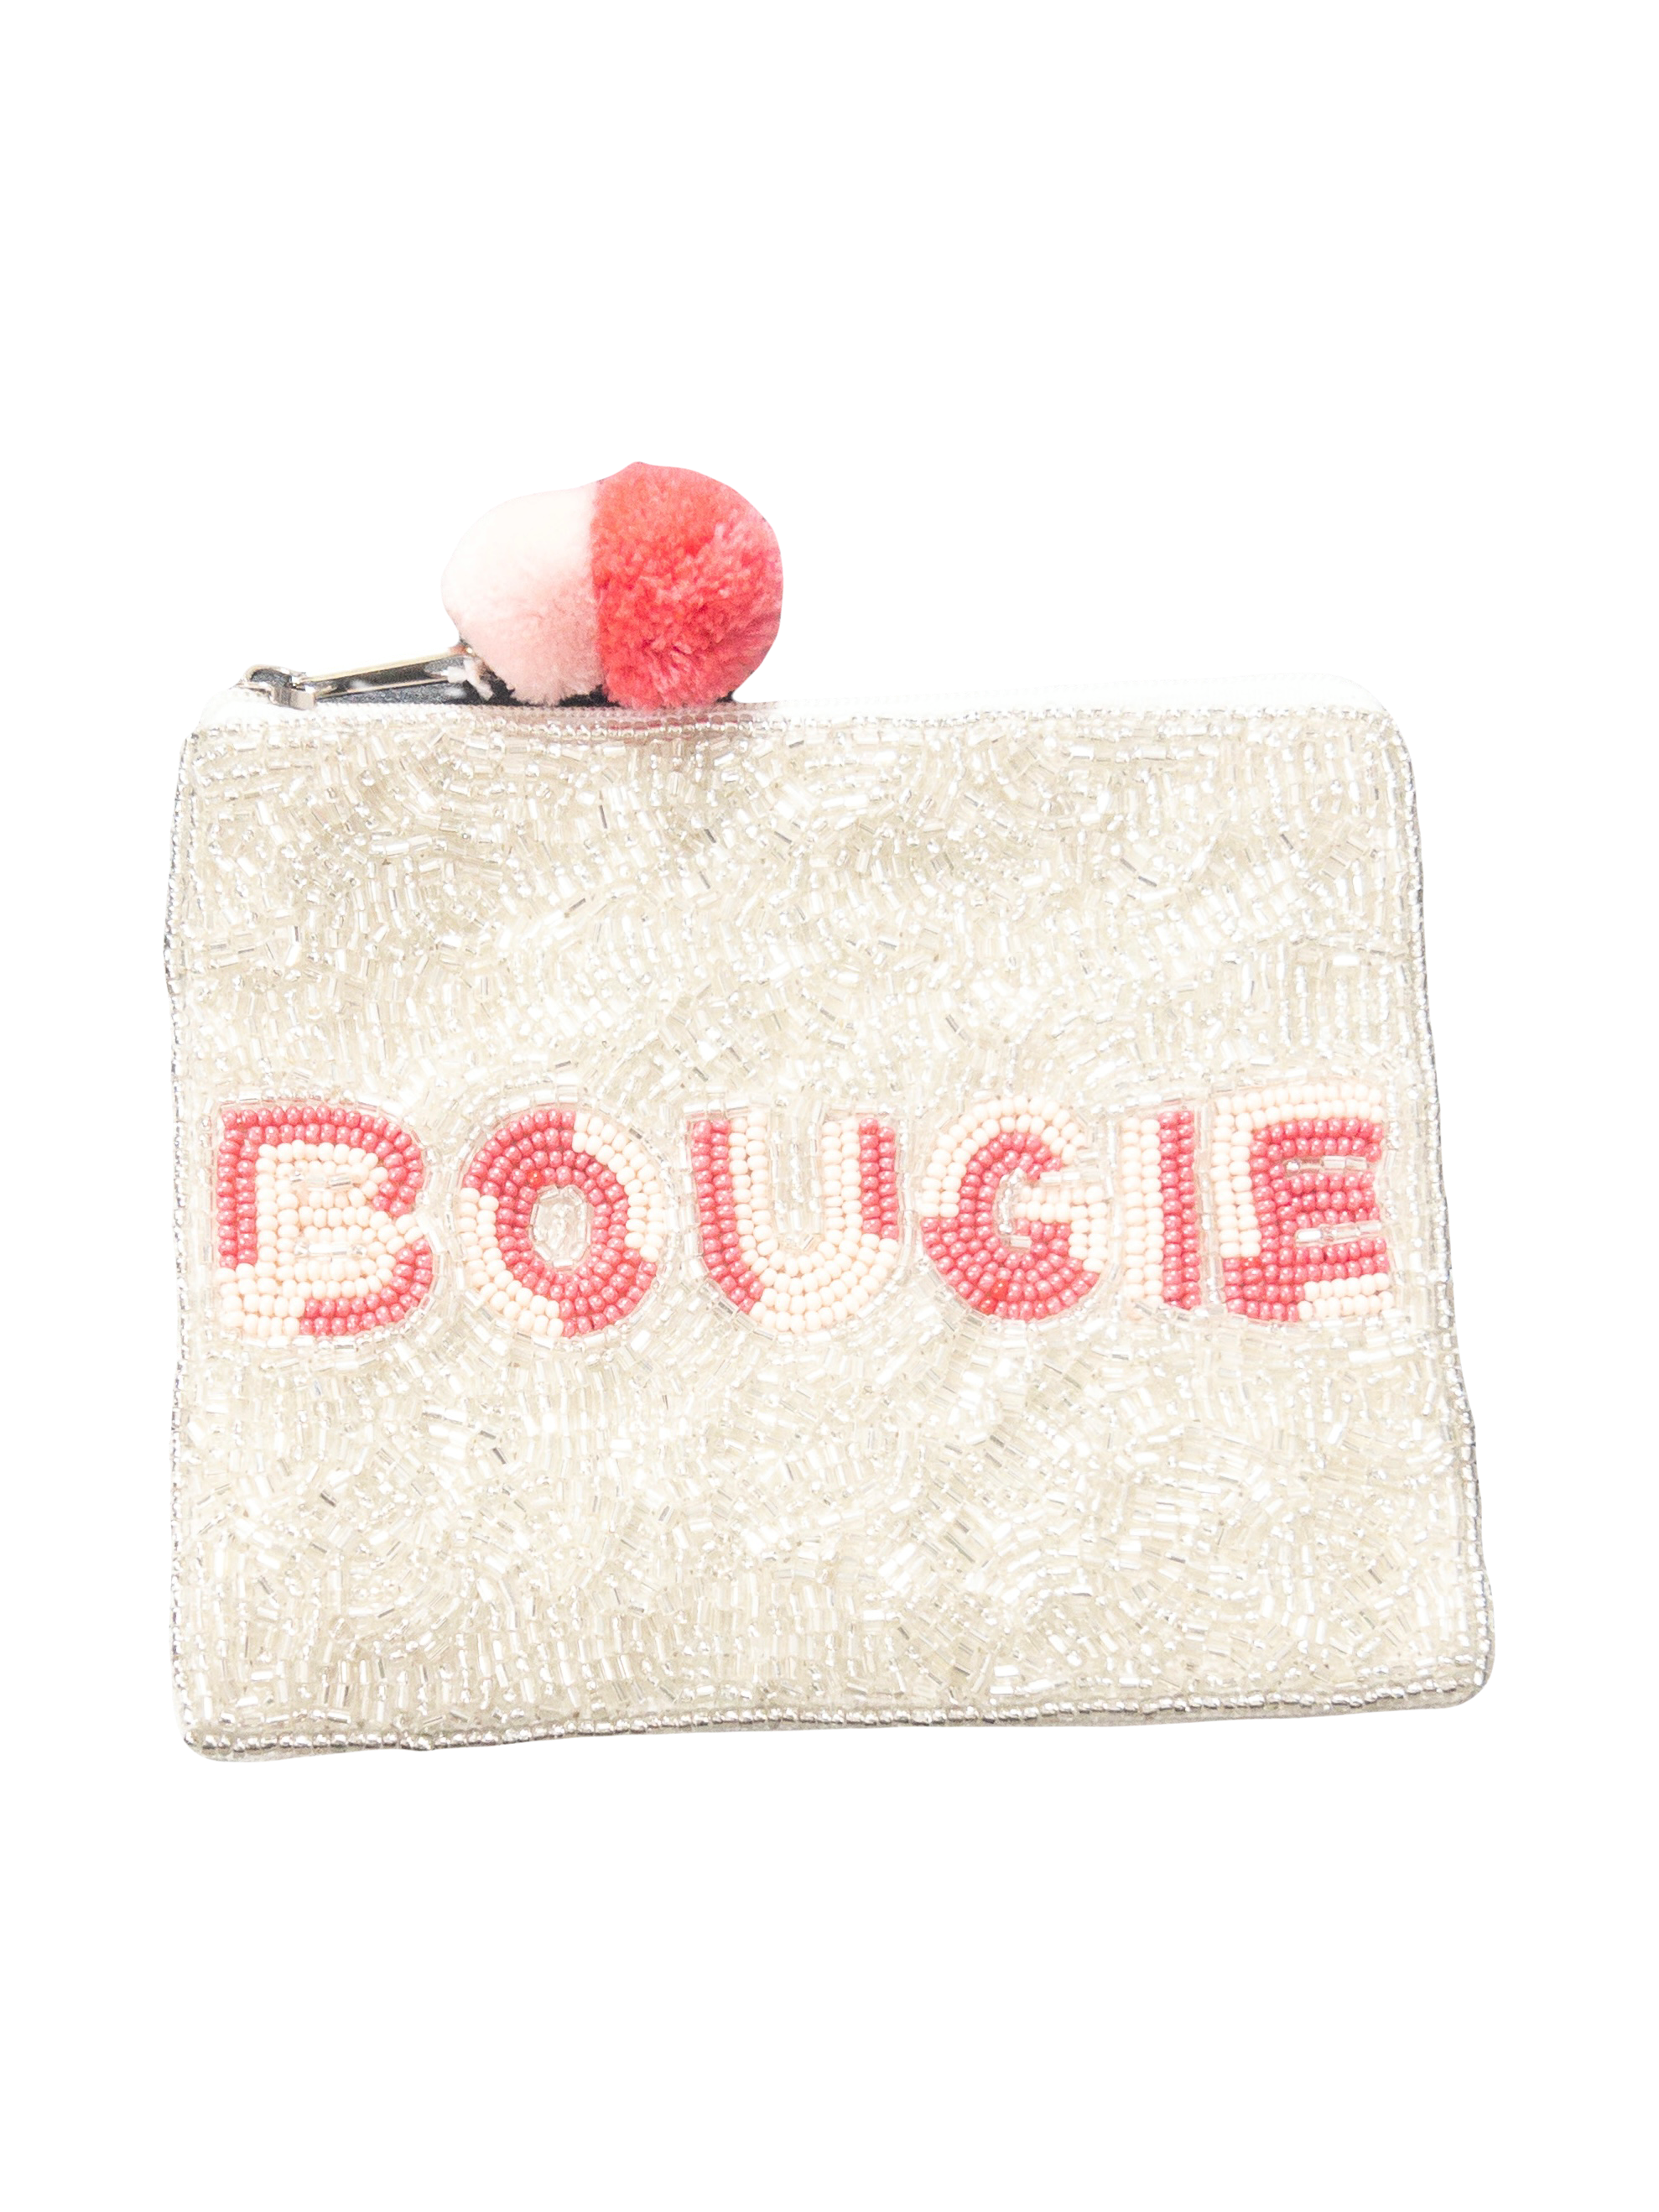 BOUGIE BEADED LA CHIC COIN POUCH